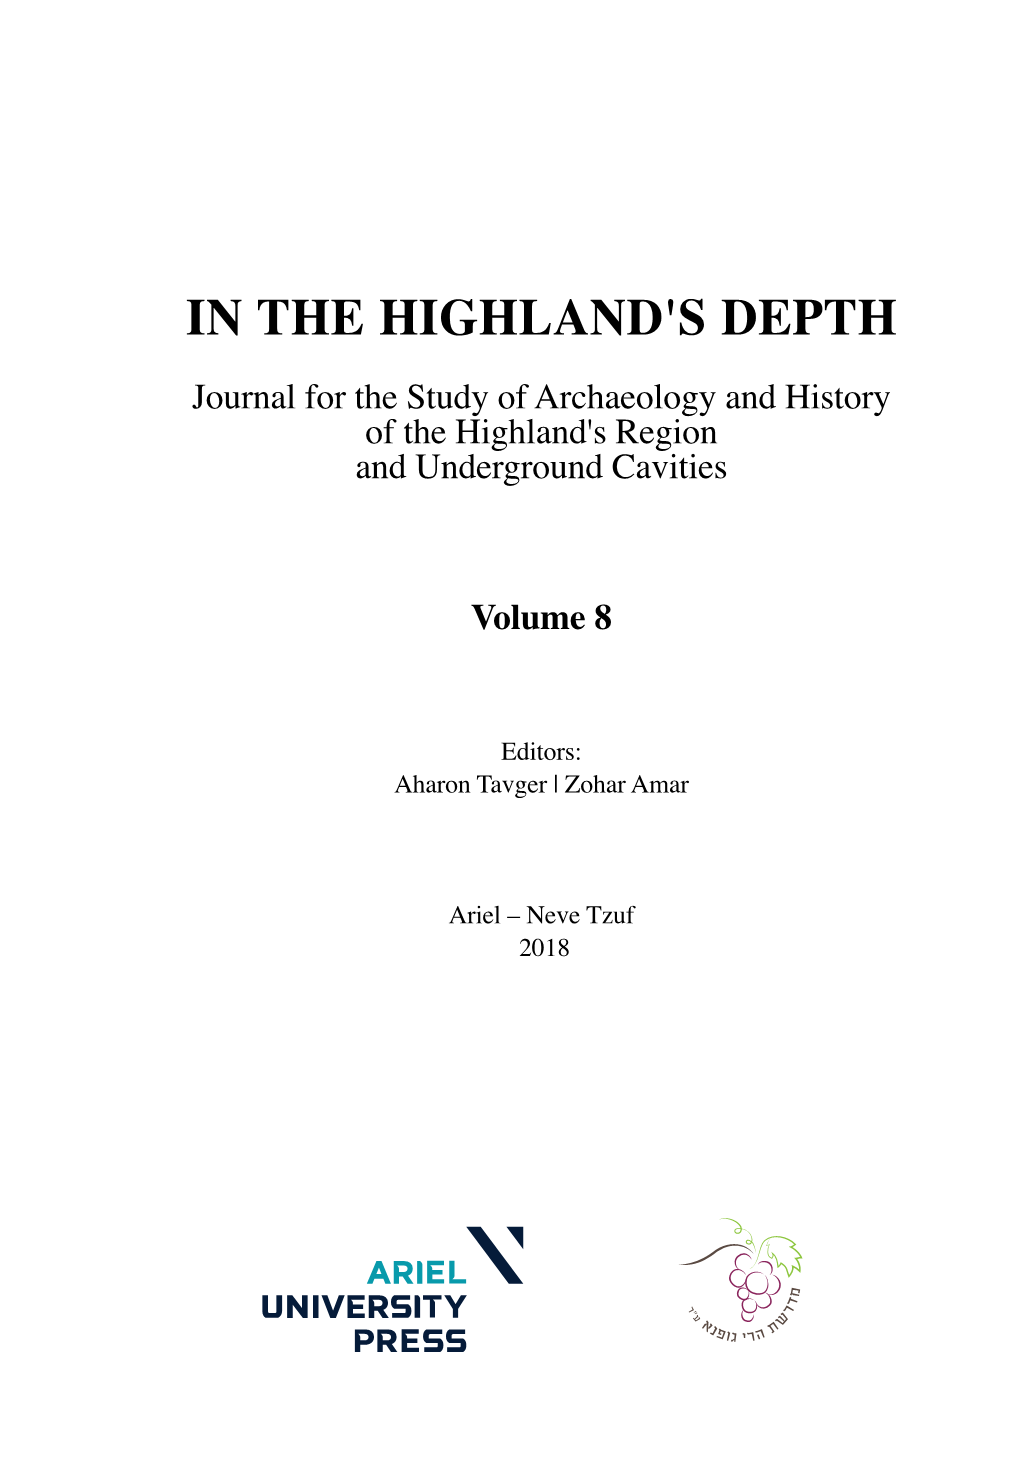 IN the HIGHLAND's DEPTH Journal for the Study of Archaeology and History of the Highland's Region and Underground Cavities